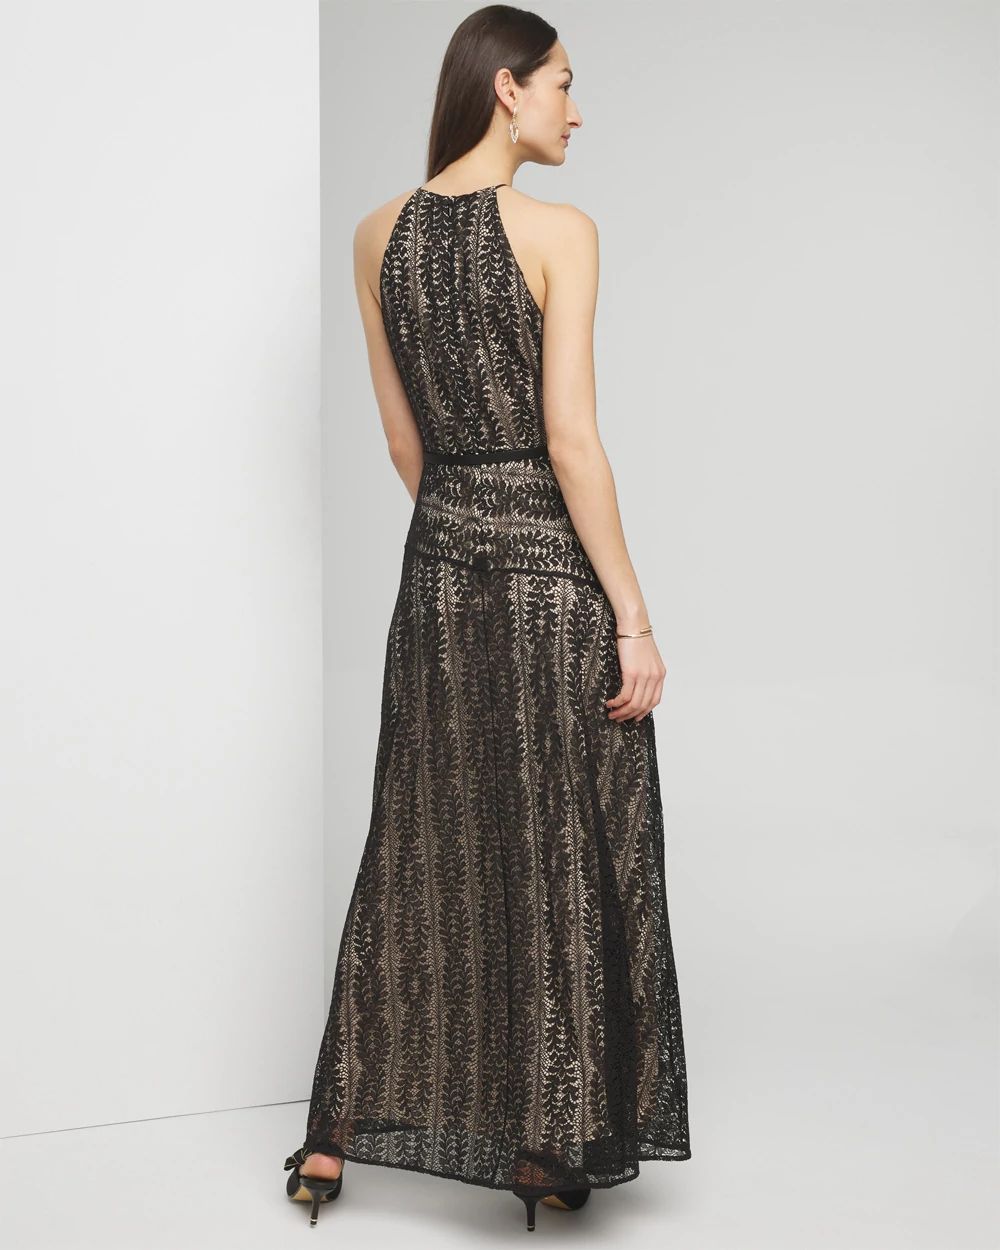 Sleeveless Halter Lace Maxi Dress click to view larger image.